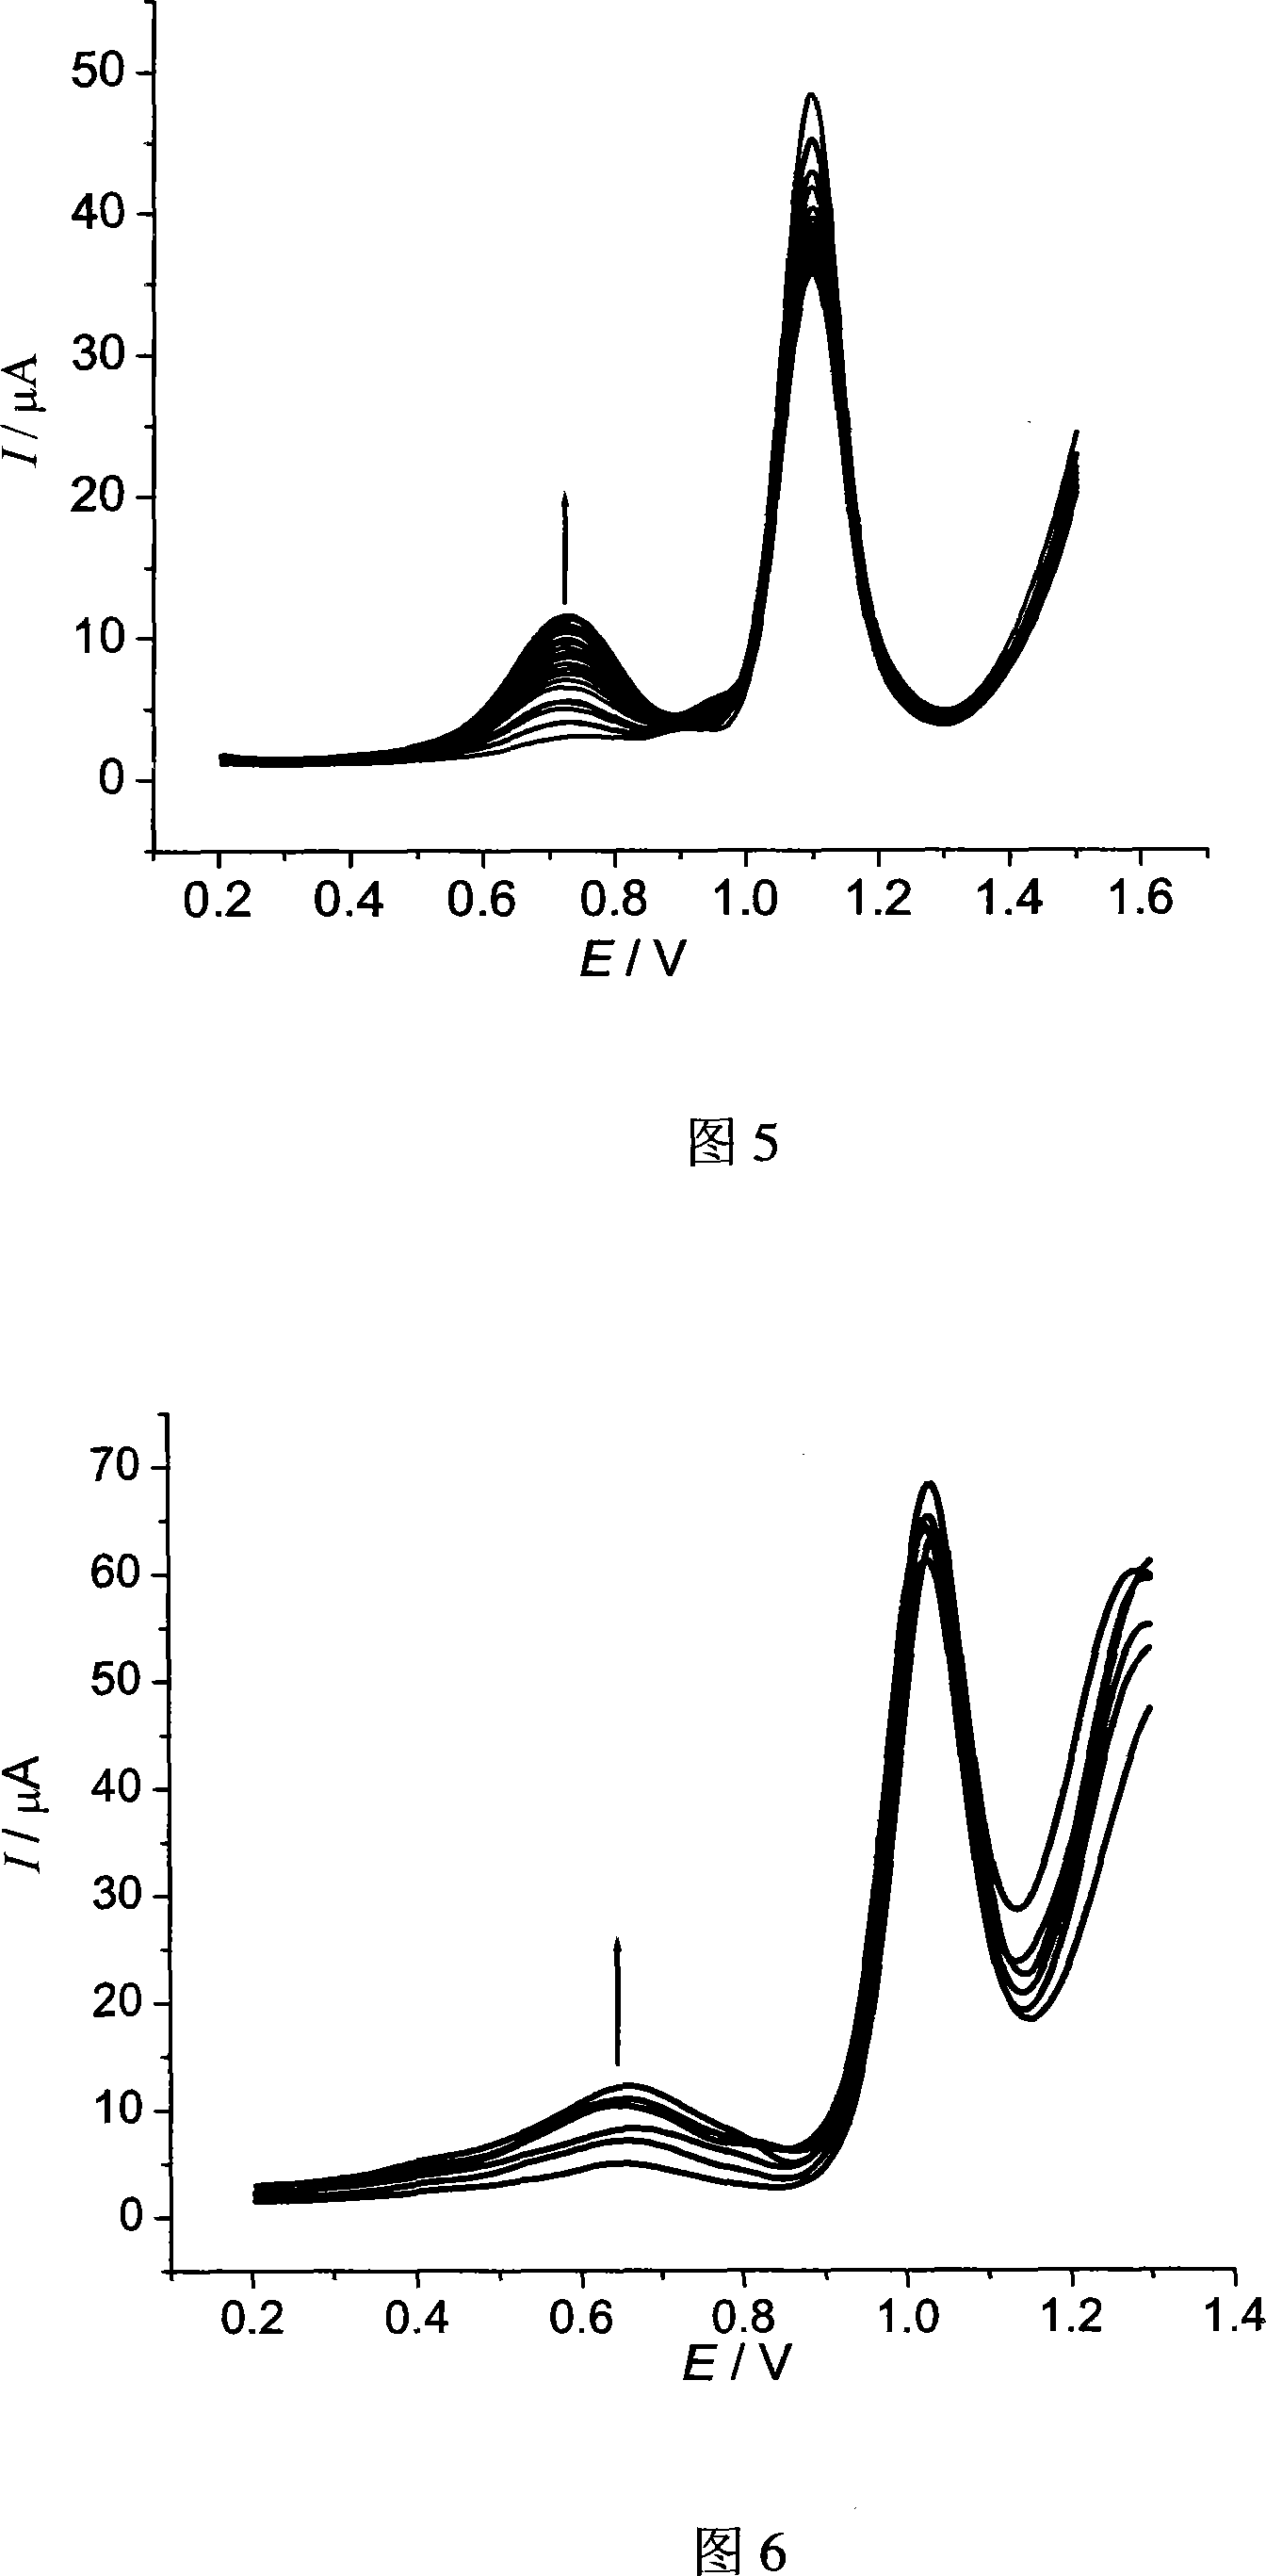 Method and device for fixing and assembling DNA and markers